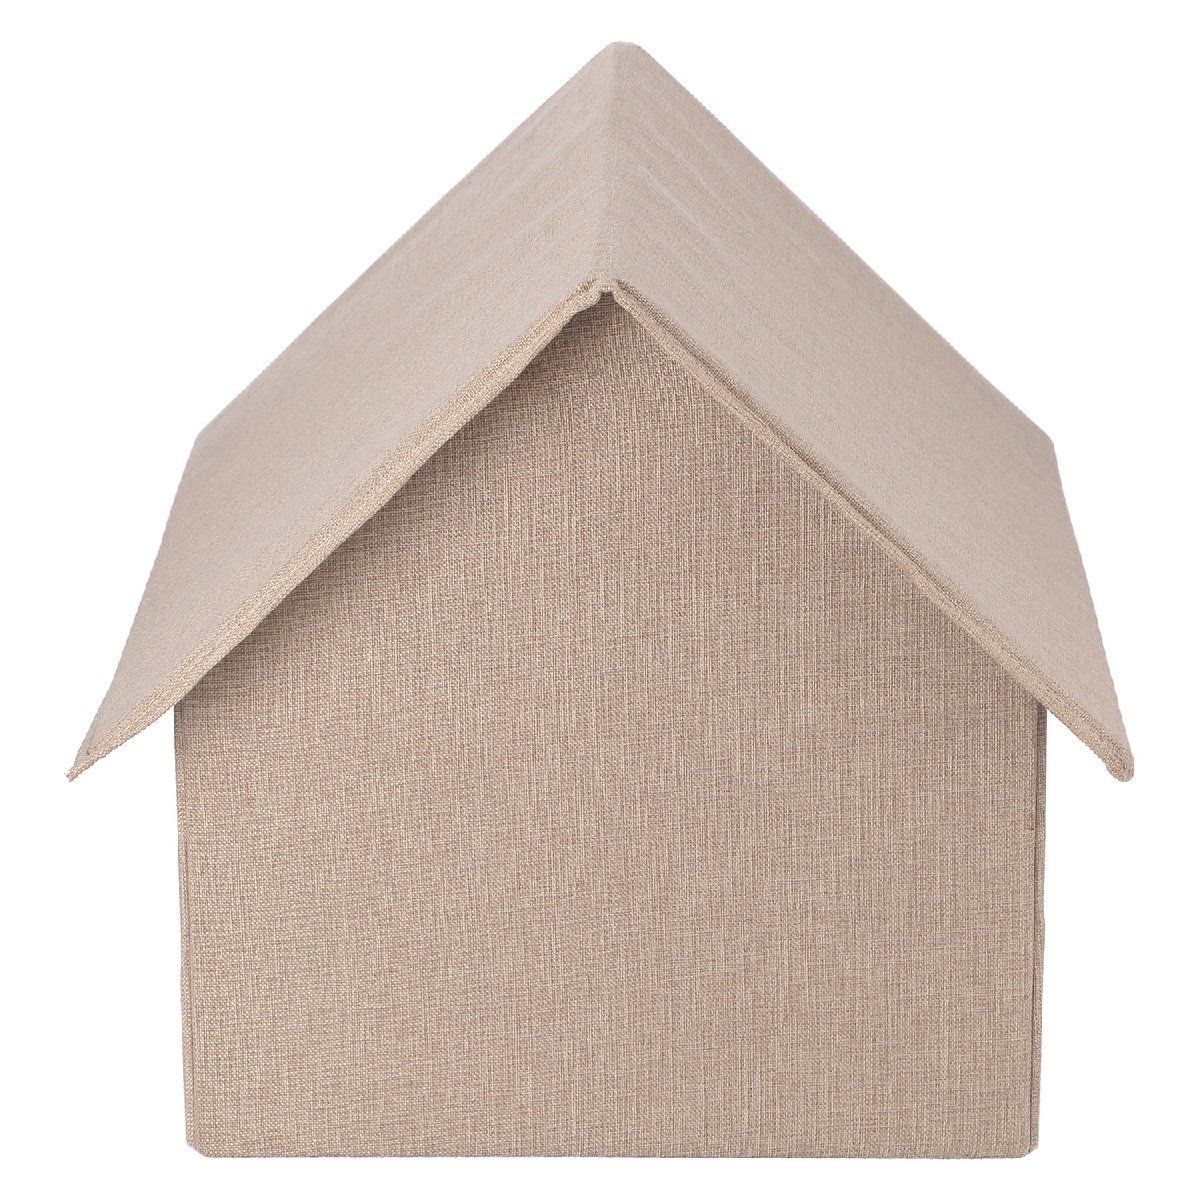  cat cat in pet house cat small size dog beige [ new goods ][ free shipping ]( Hokkaido Okinawa remote island postage separately )